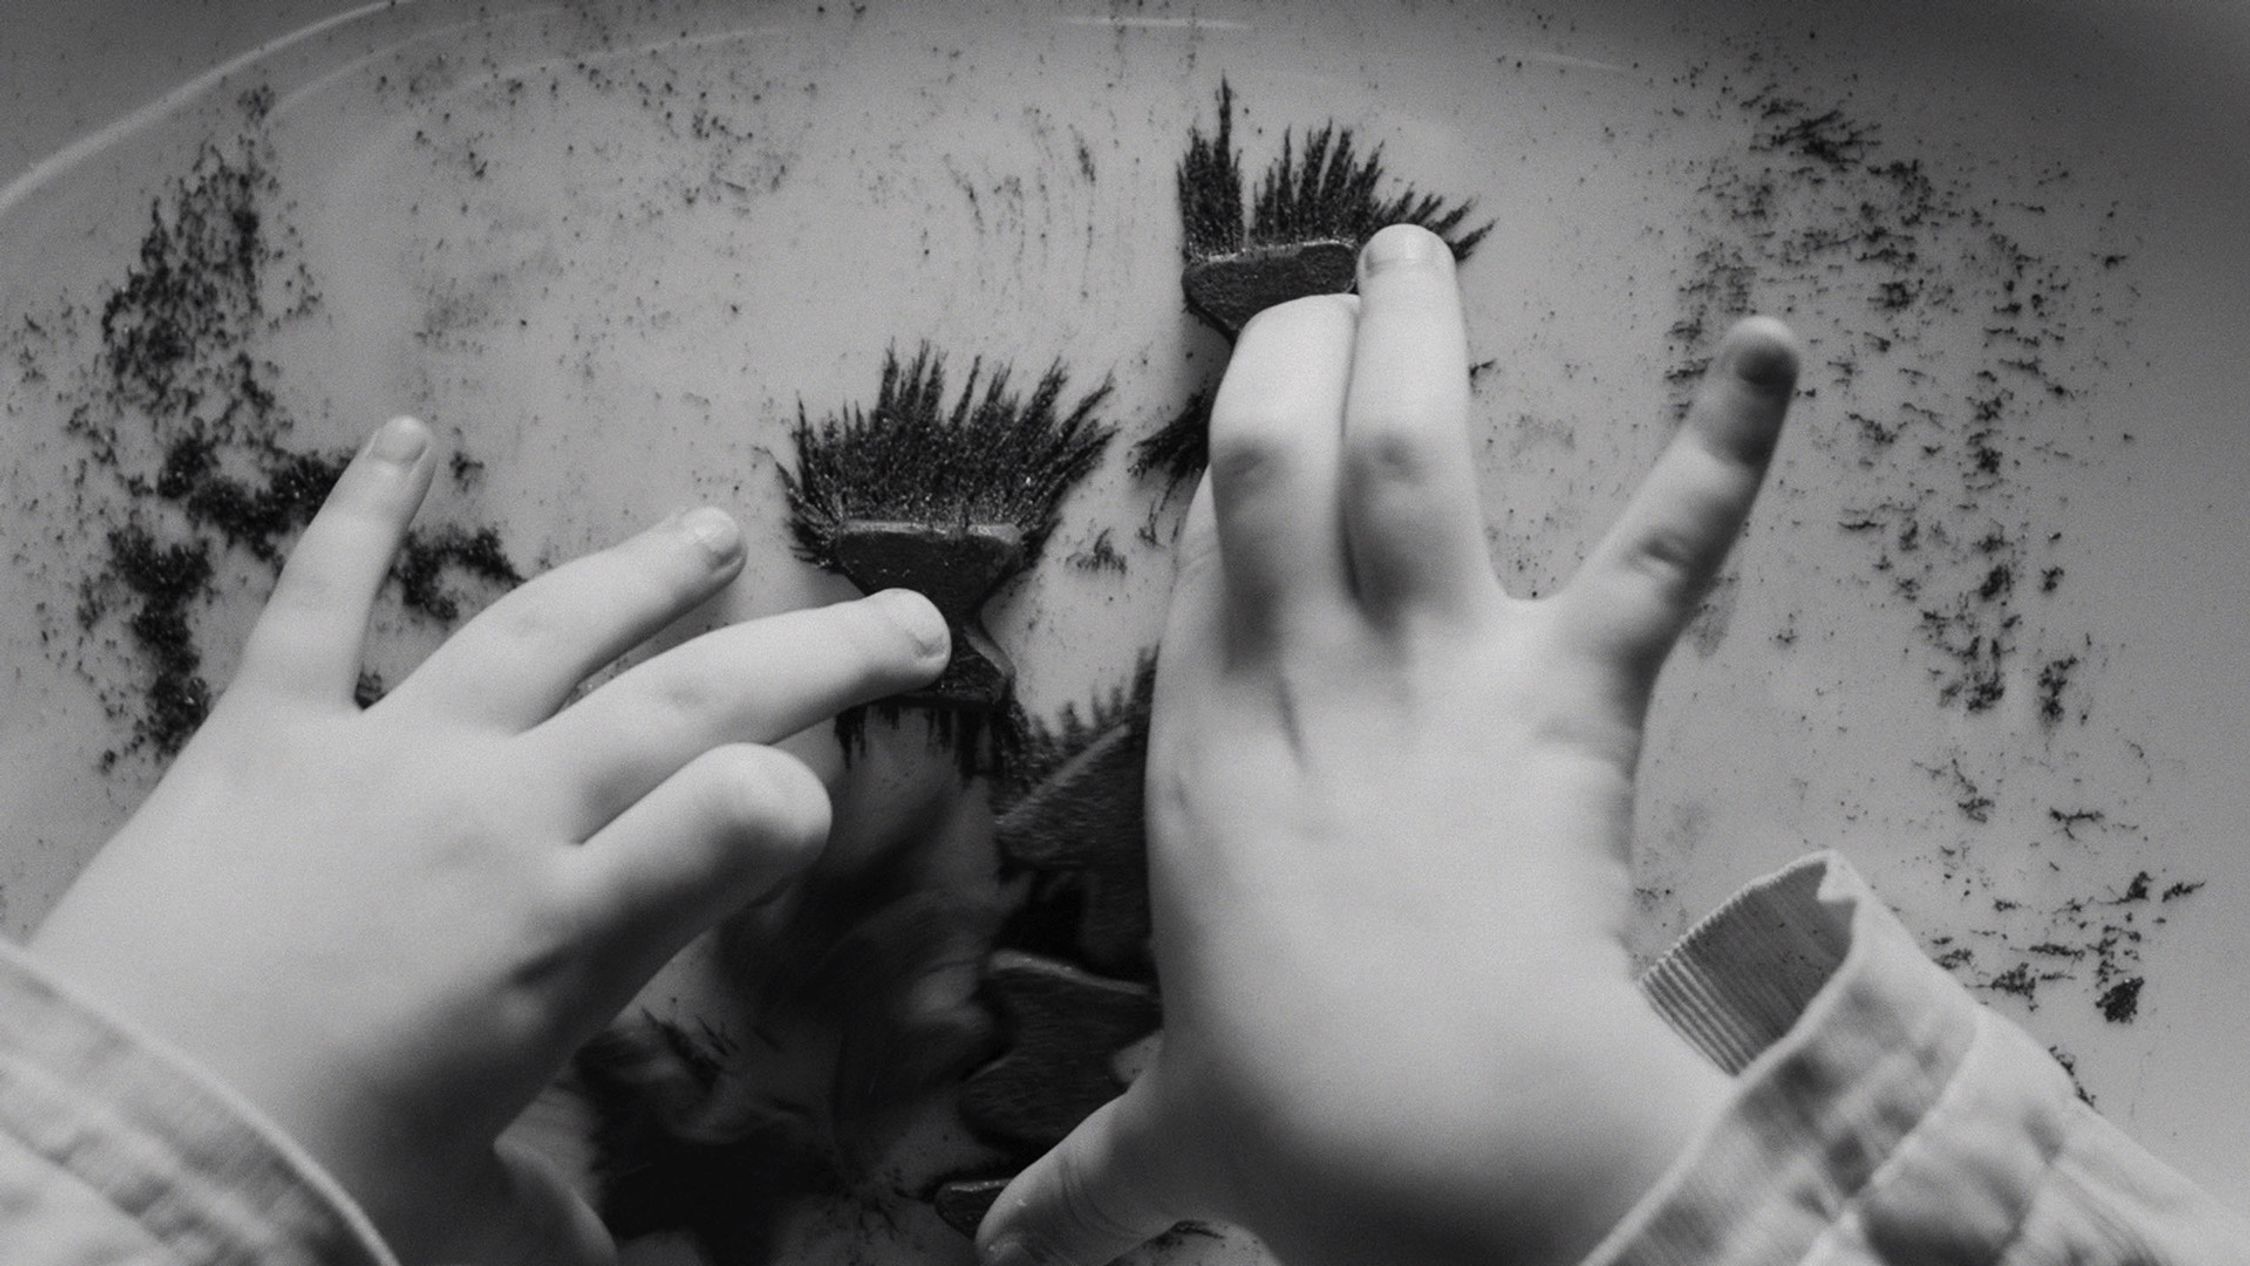 The image is a monochrome photograph of a child's hands interacting with magnets. The hands are small with youthful features, suggesting the person's young age. The magnets on the fingertips have attracted iron filings, which have clustered around the poles of the magnets, creating a visual display of the magnetic field lines. The activity seems to be an exploratory or educational play with the principles of magnetism.